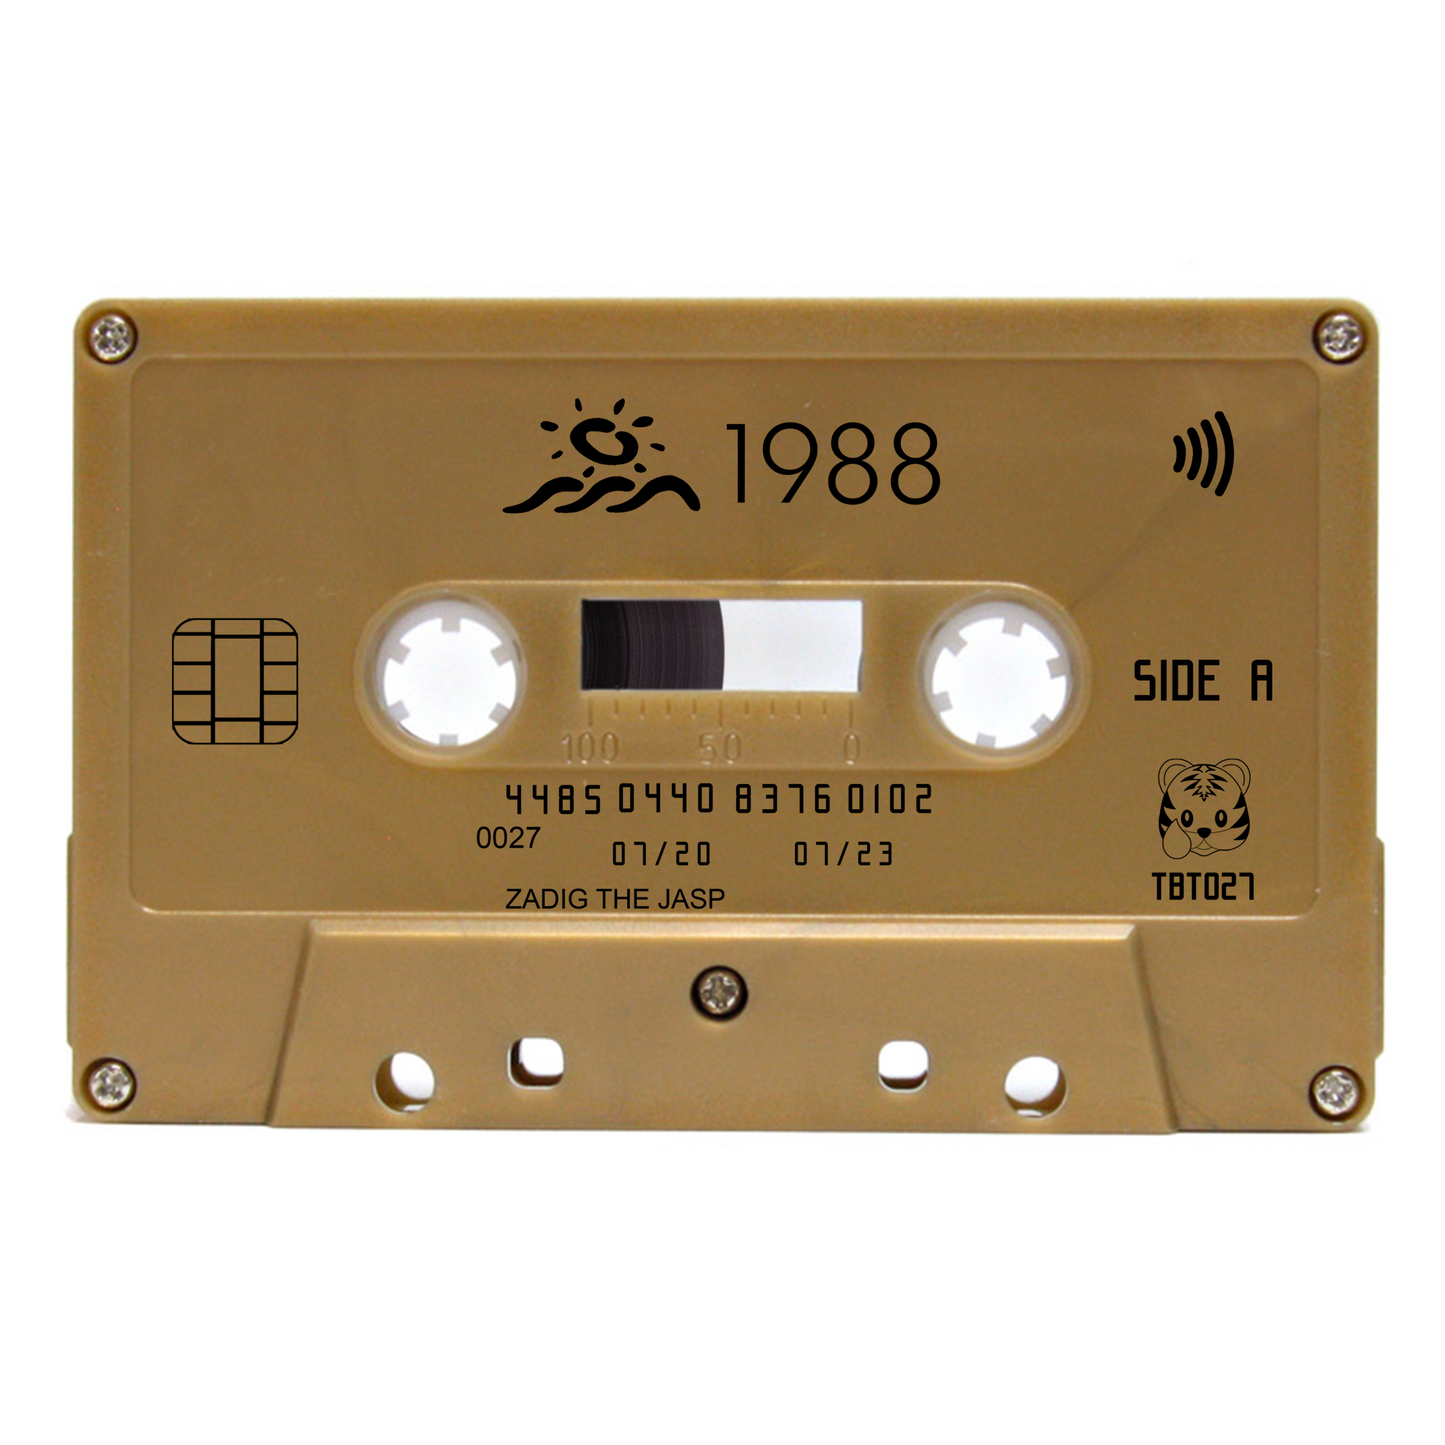 Zadig The Jasp - "1988" Limited Edition Cassette Tape